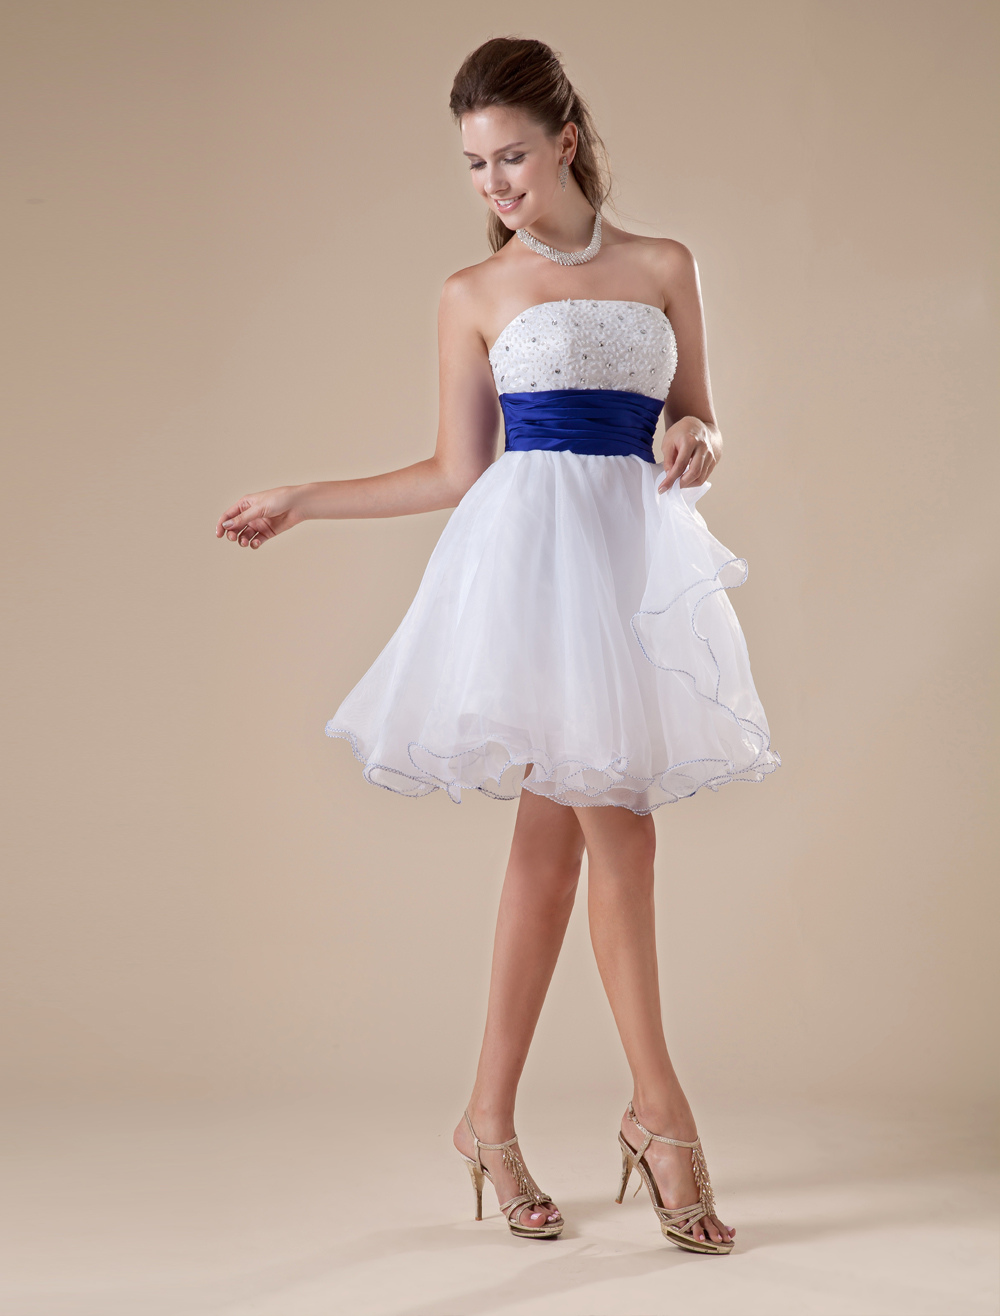 Modern White Tulle Homecoming Dress with Sweetheart Neckline - Milanoo.com